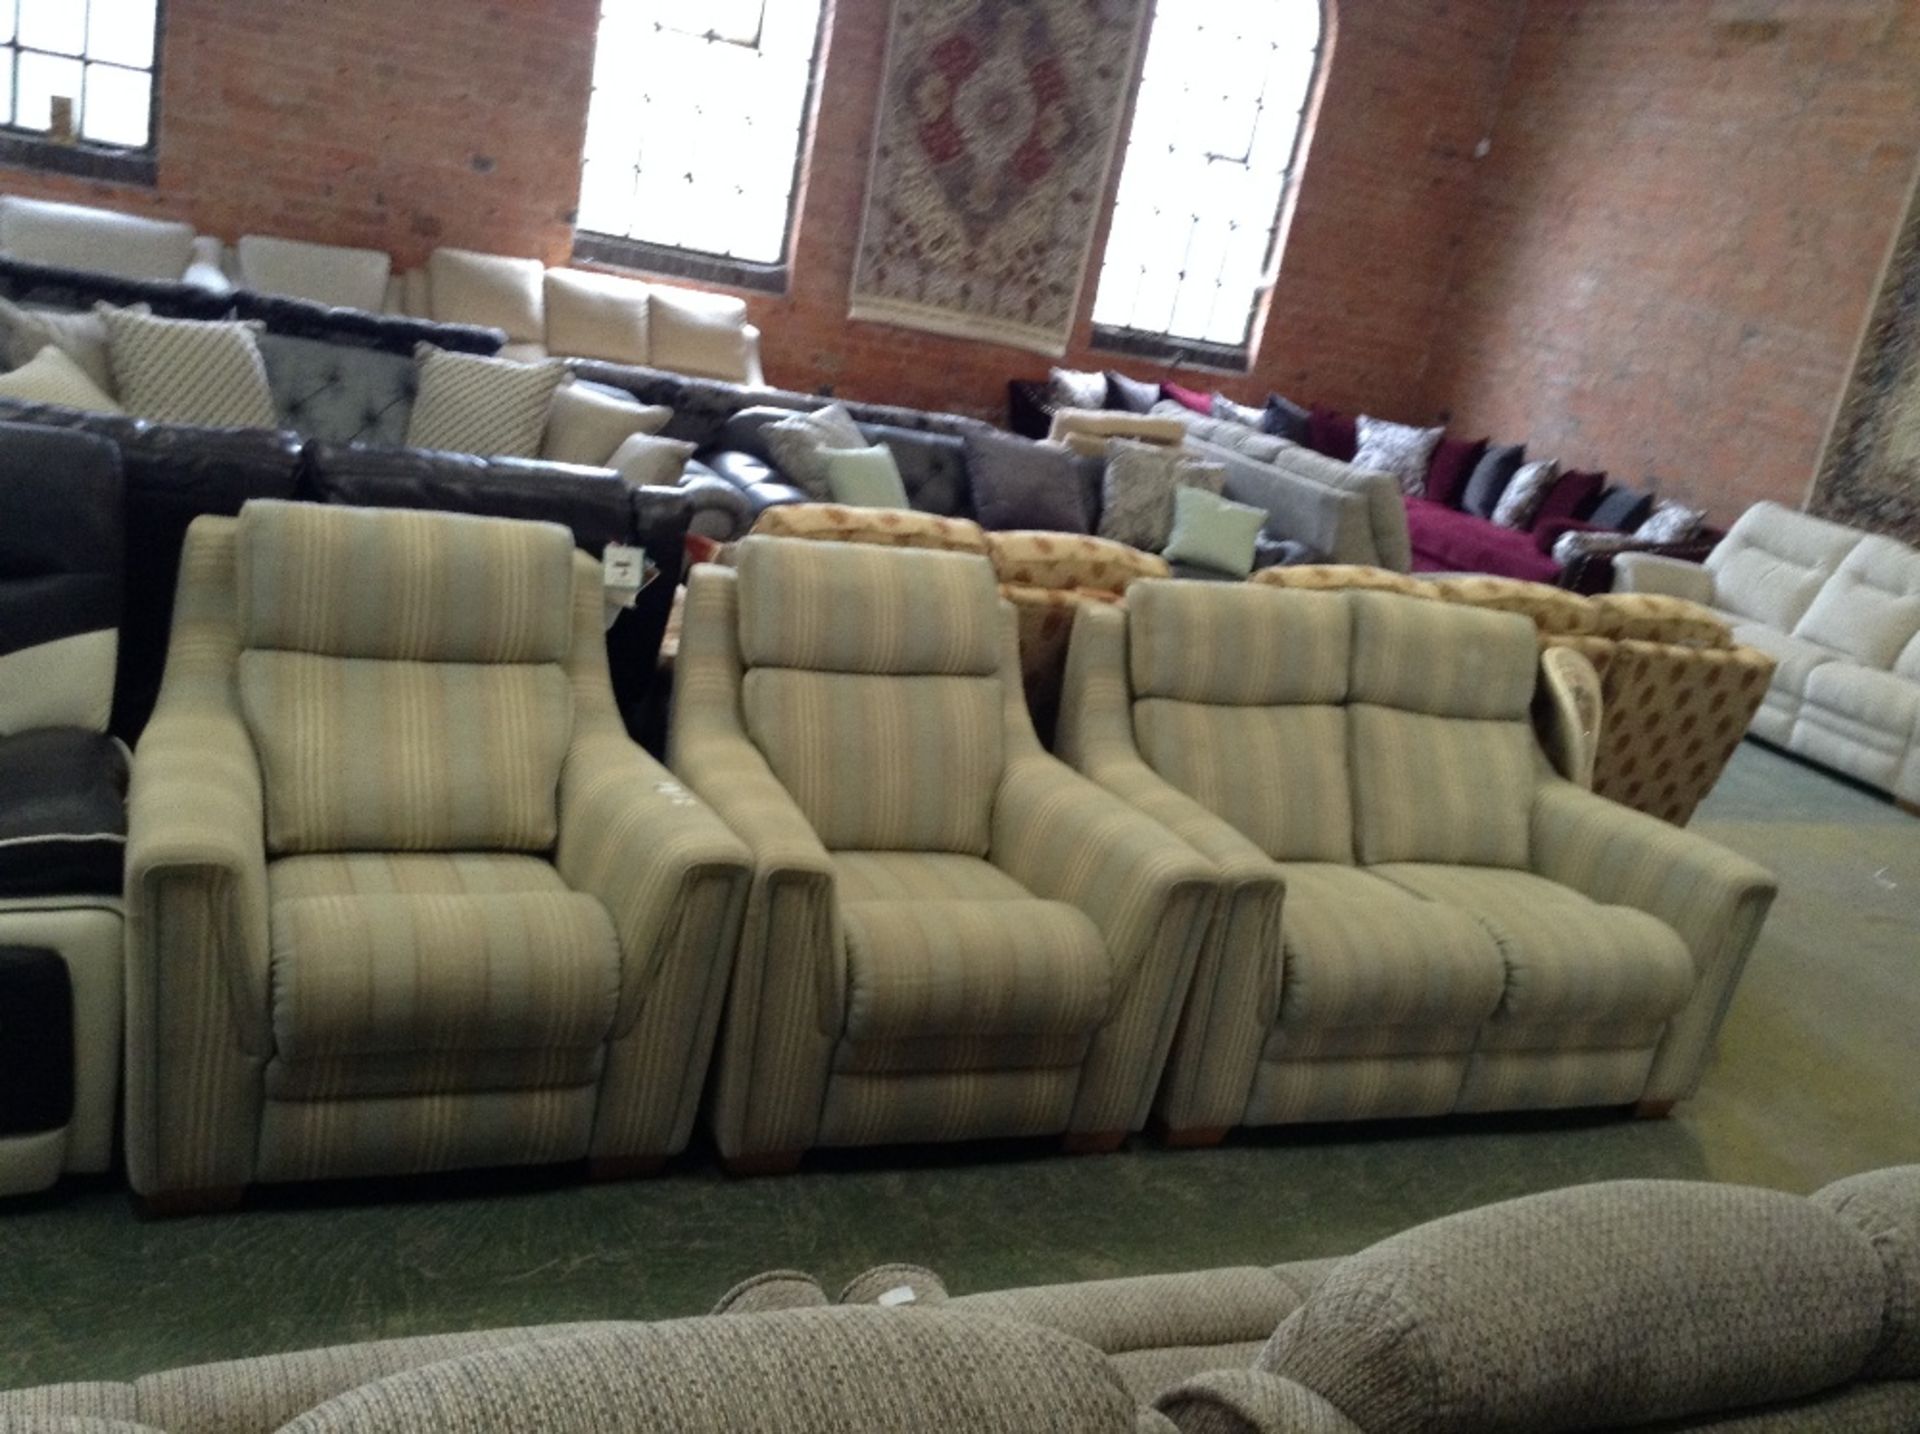 GREEN AND GOLD STRIPED 2 SEATER SOFA AND 2 CHAIRS